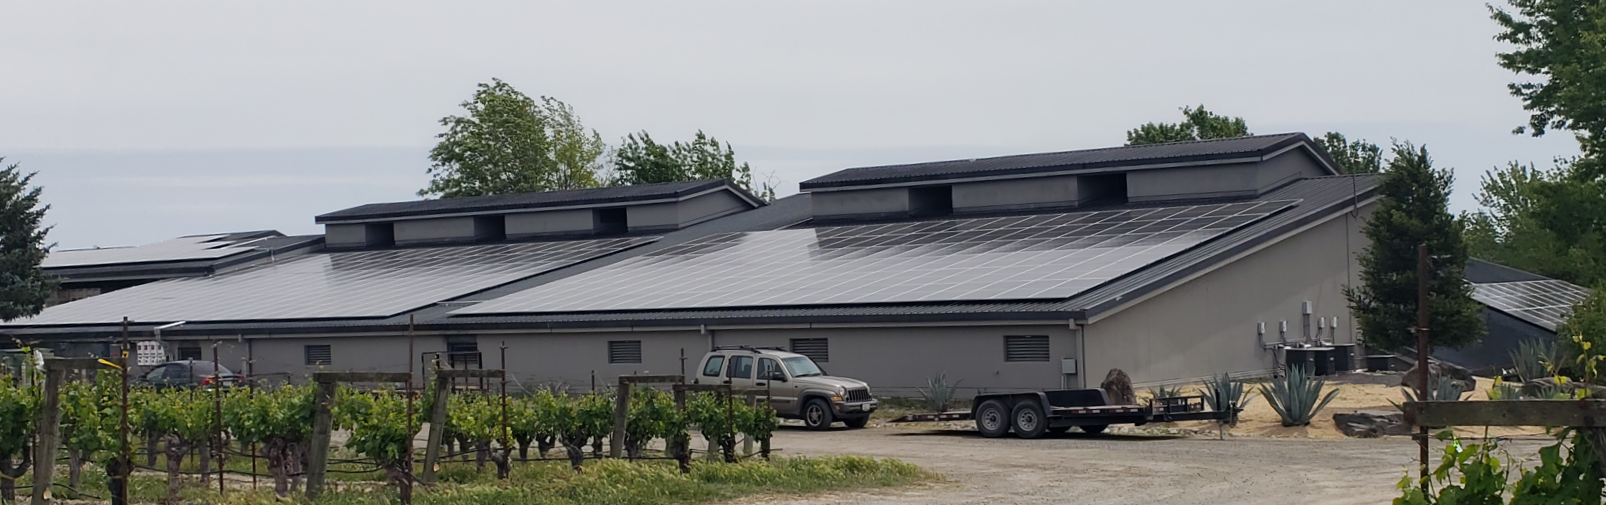 SolarCraft Completes Solar Power Installation for Kistler Vineyards - Sonoma County Winery Captures the Sun and Saves